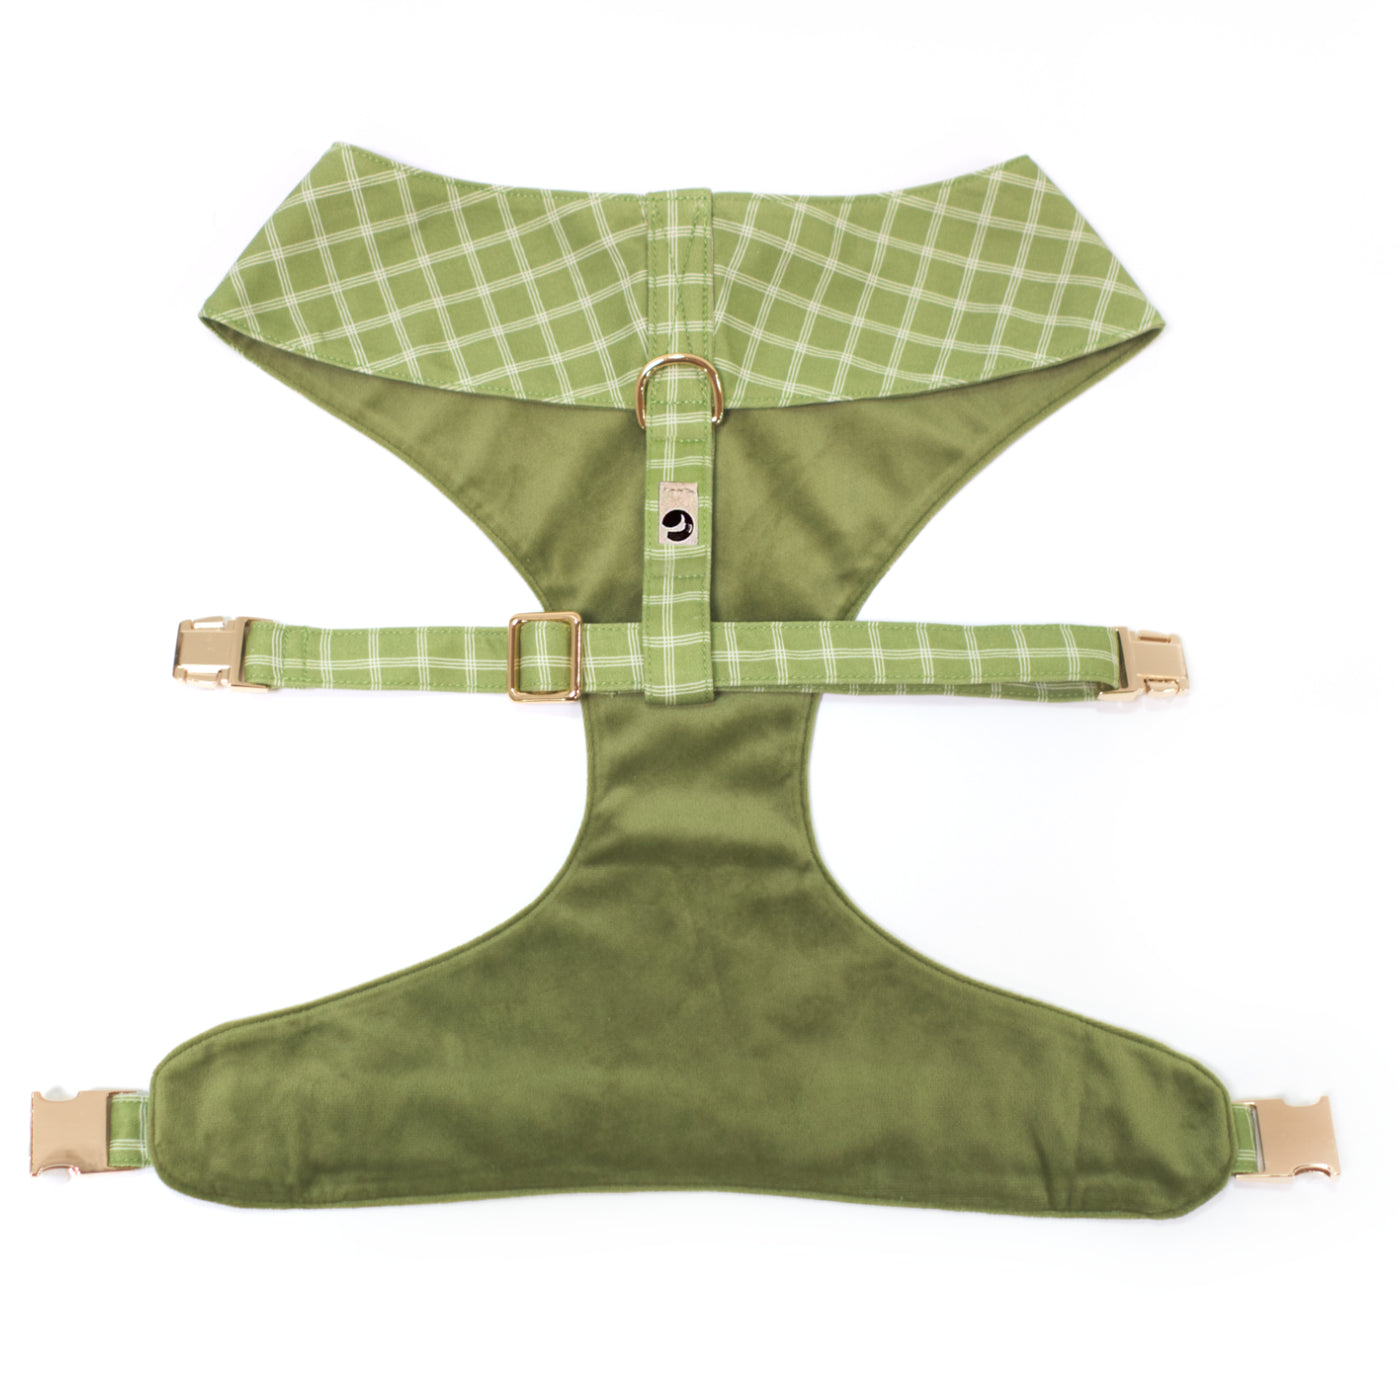 Top/back view of reversible dog harness with gold hardware in moss green plaid and velvet